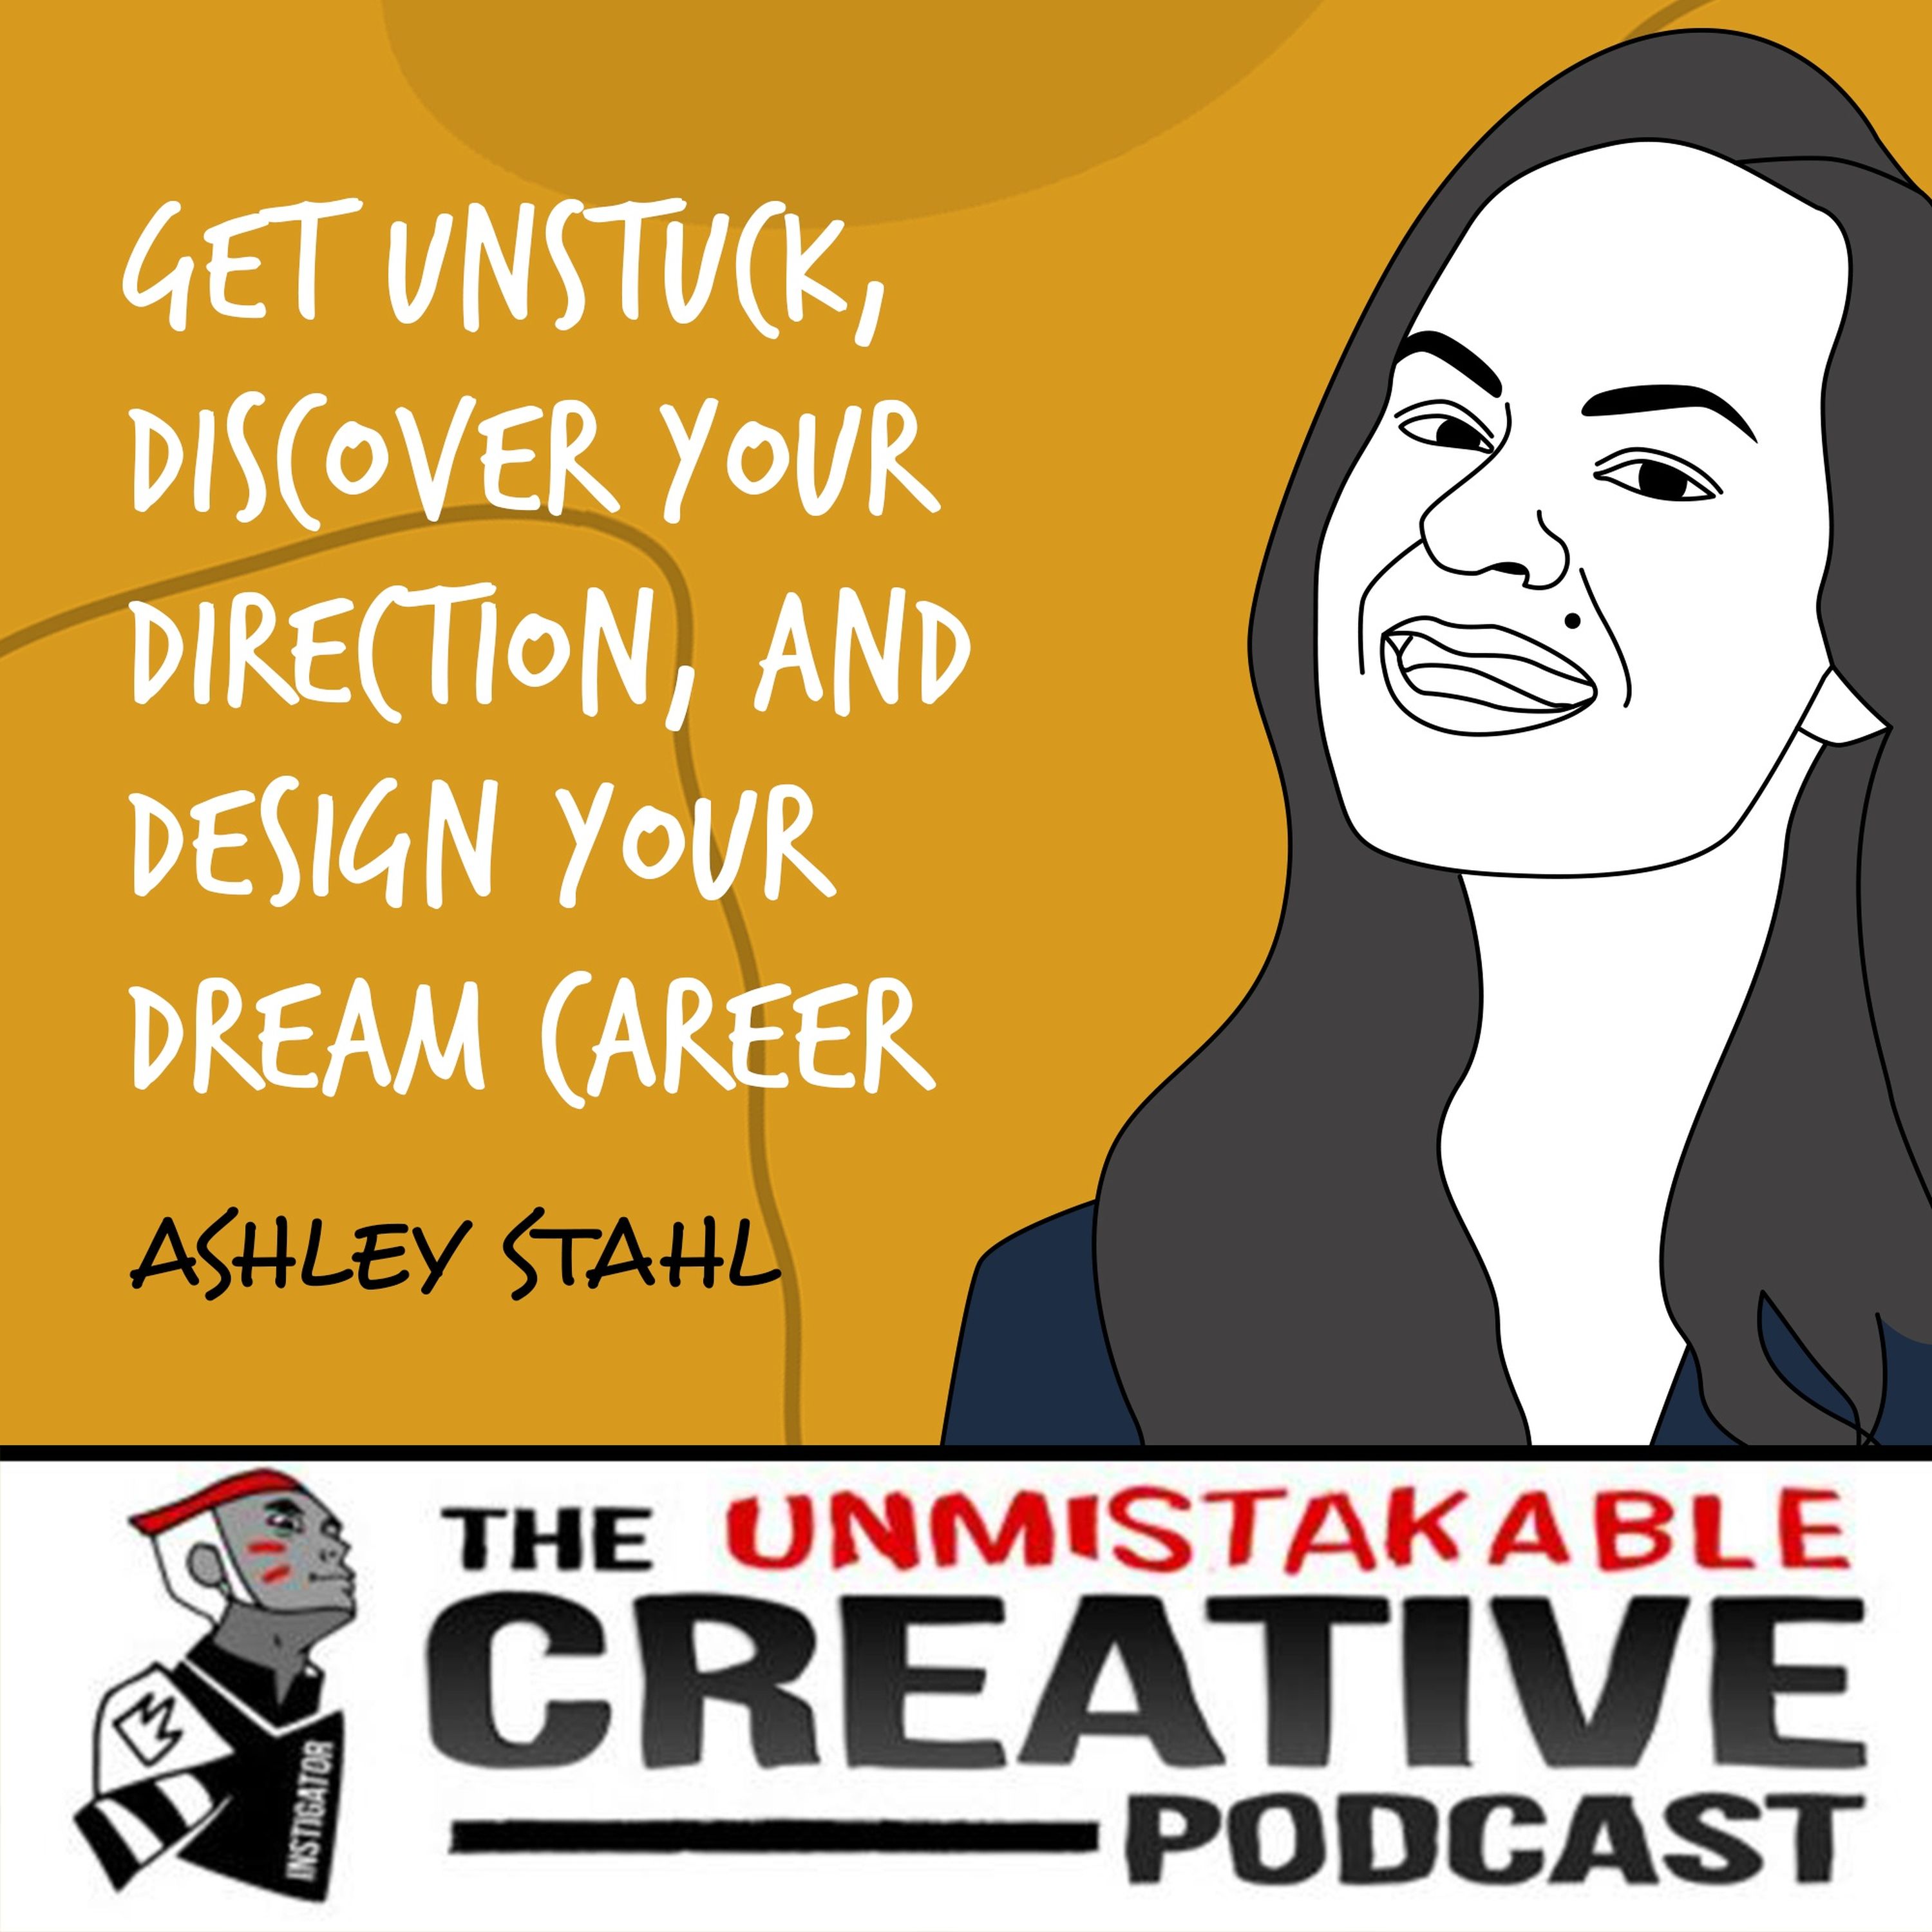 Ashley Stahl - Part 1 | Get Unstuck, Discover Your Direction, and Design Your Dream Career